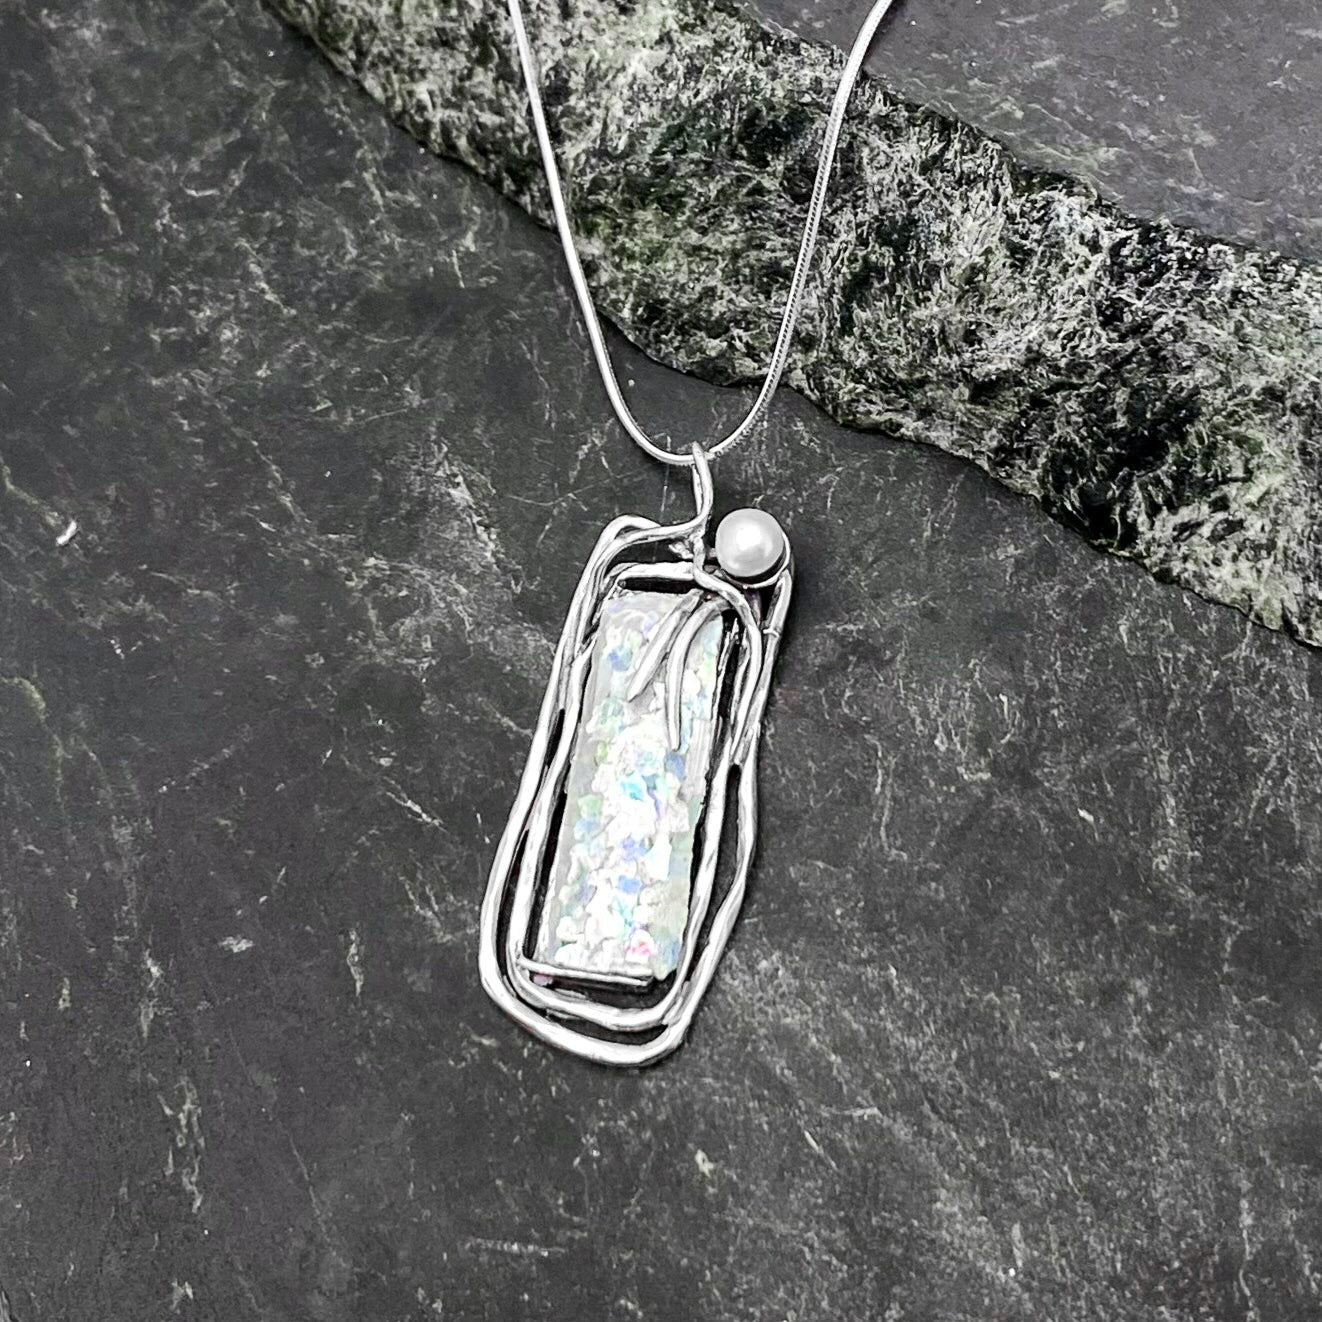 Rectangular Roman Glass suspended in a 925 Sterling Silver vined setting, accompanied by a single white pearl in the top right corner.